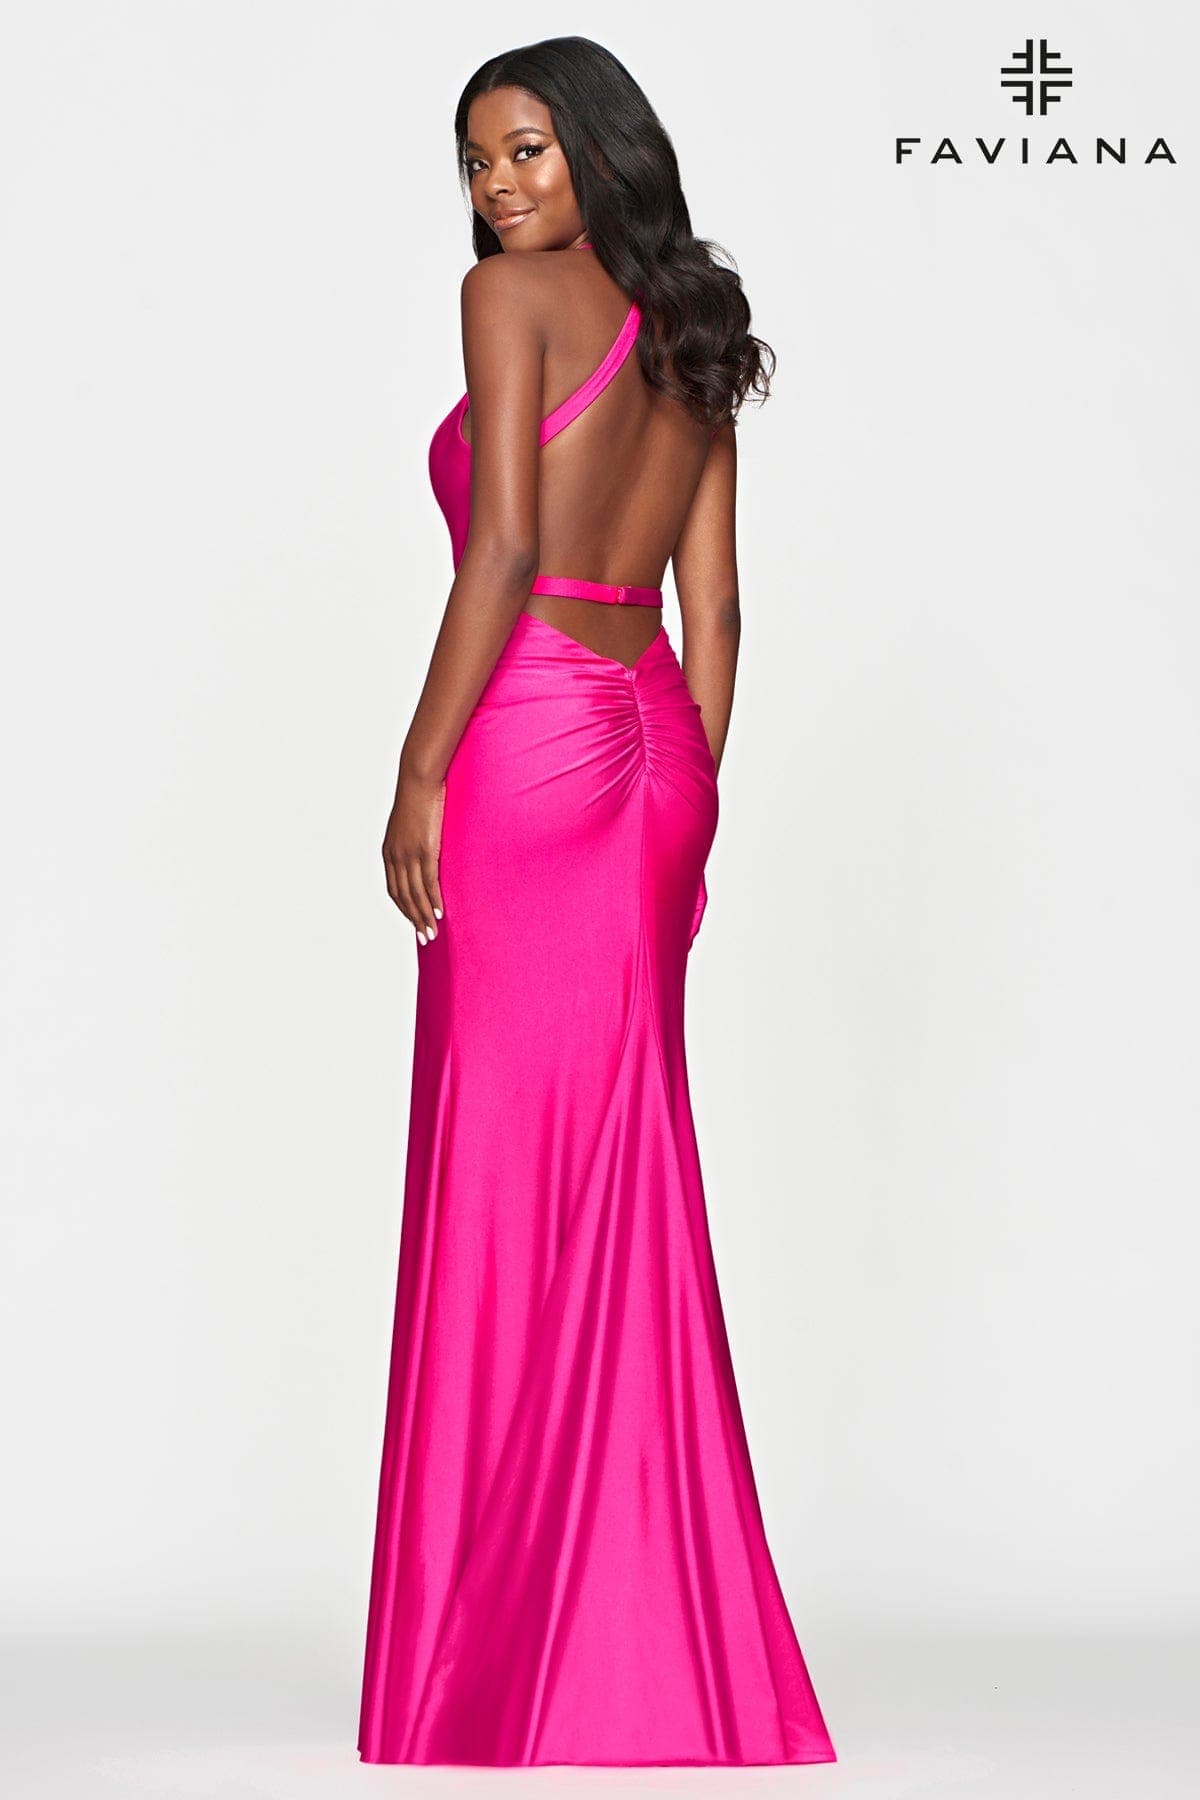 Hot Pink Tight Long V Neckline Dress With Halter Neck And Open Back